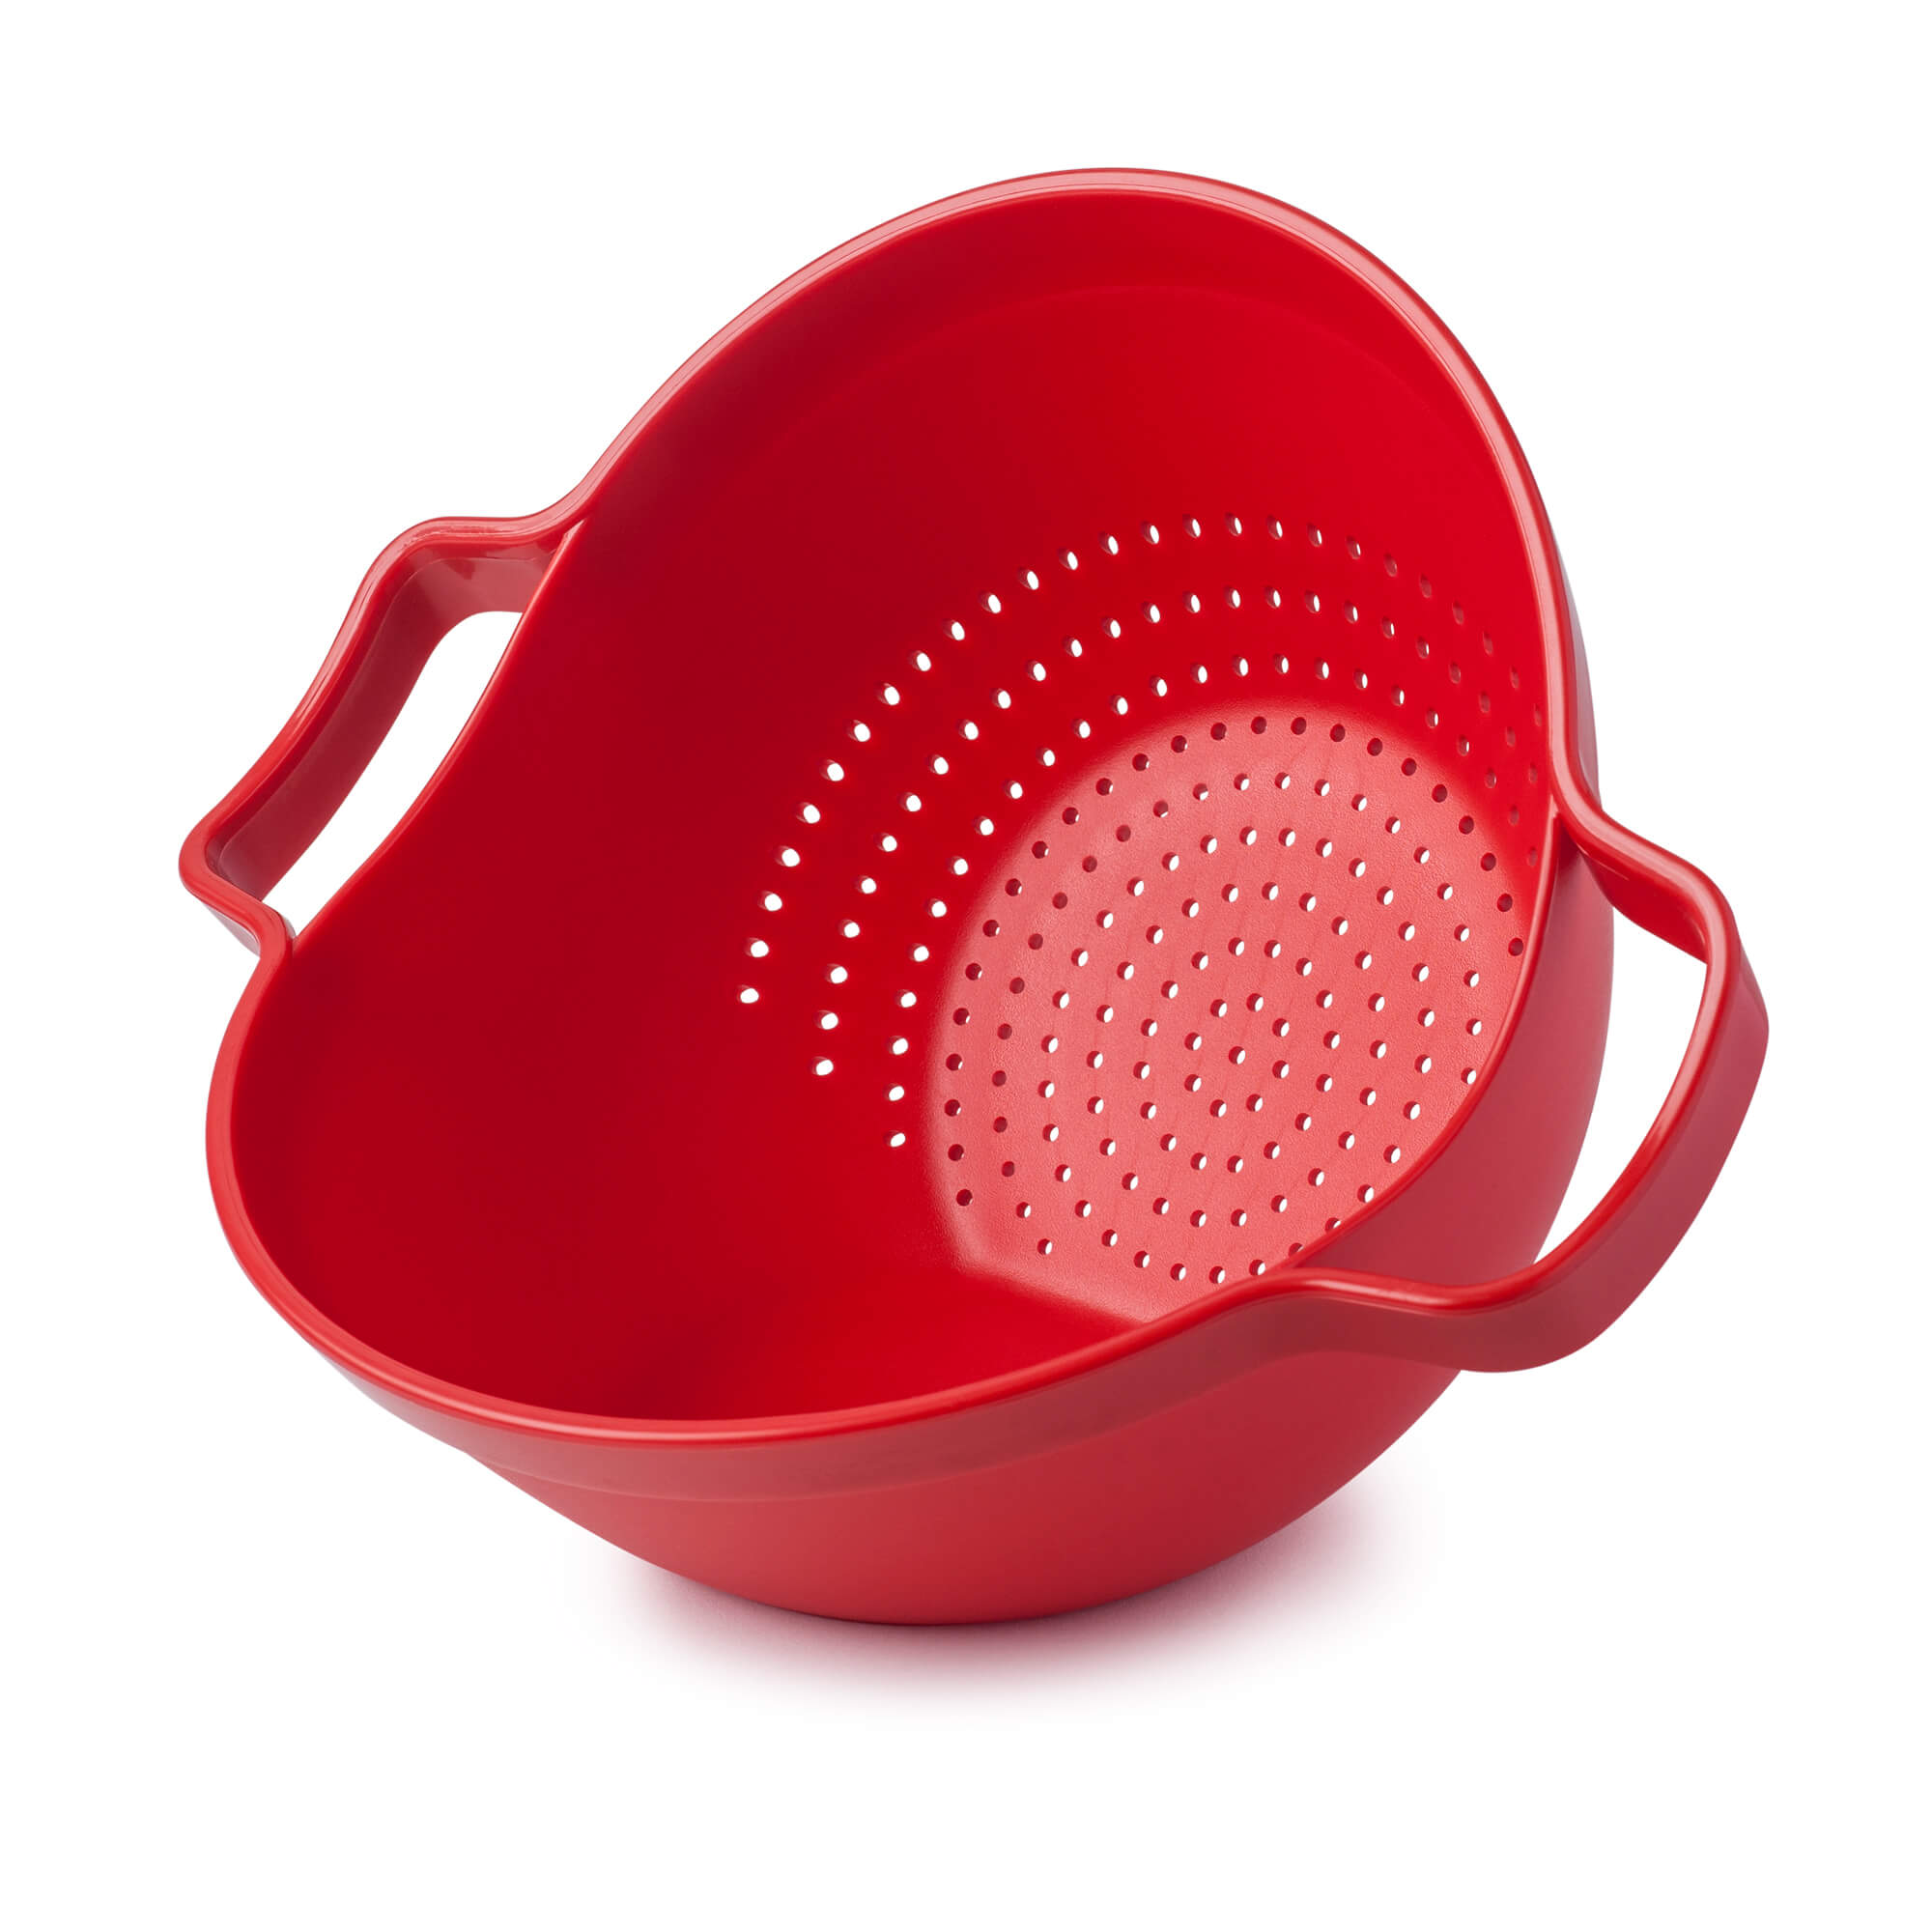 Red Drain & Serve Colander by Zeal